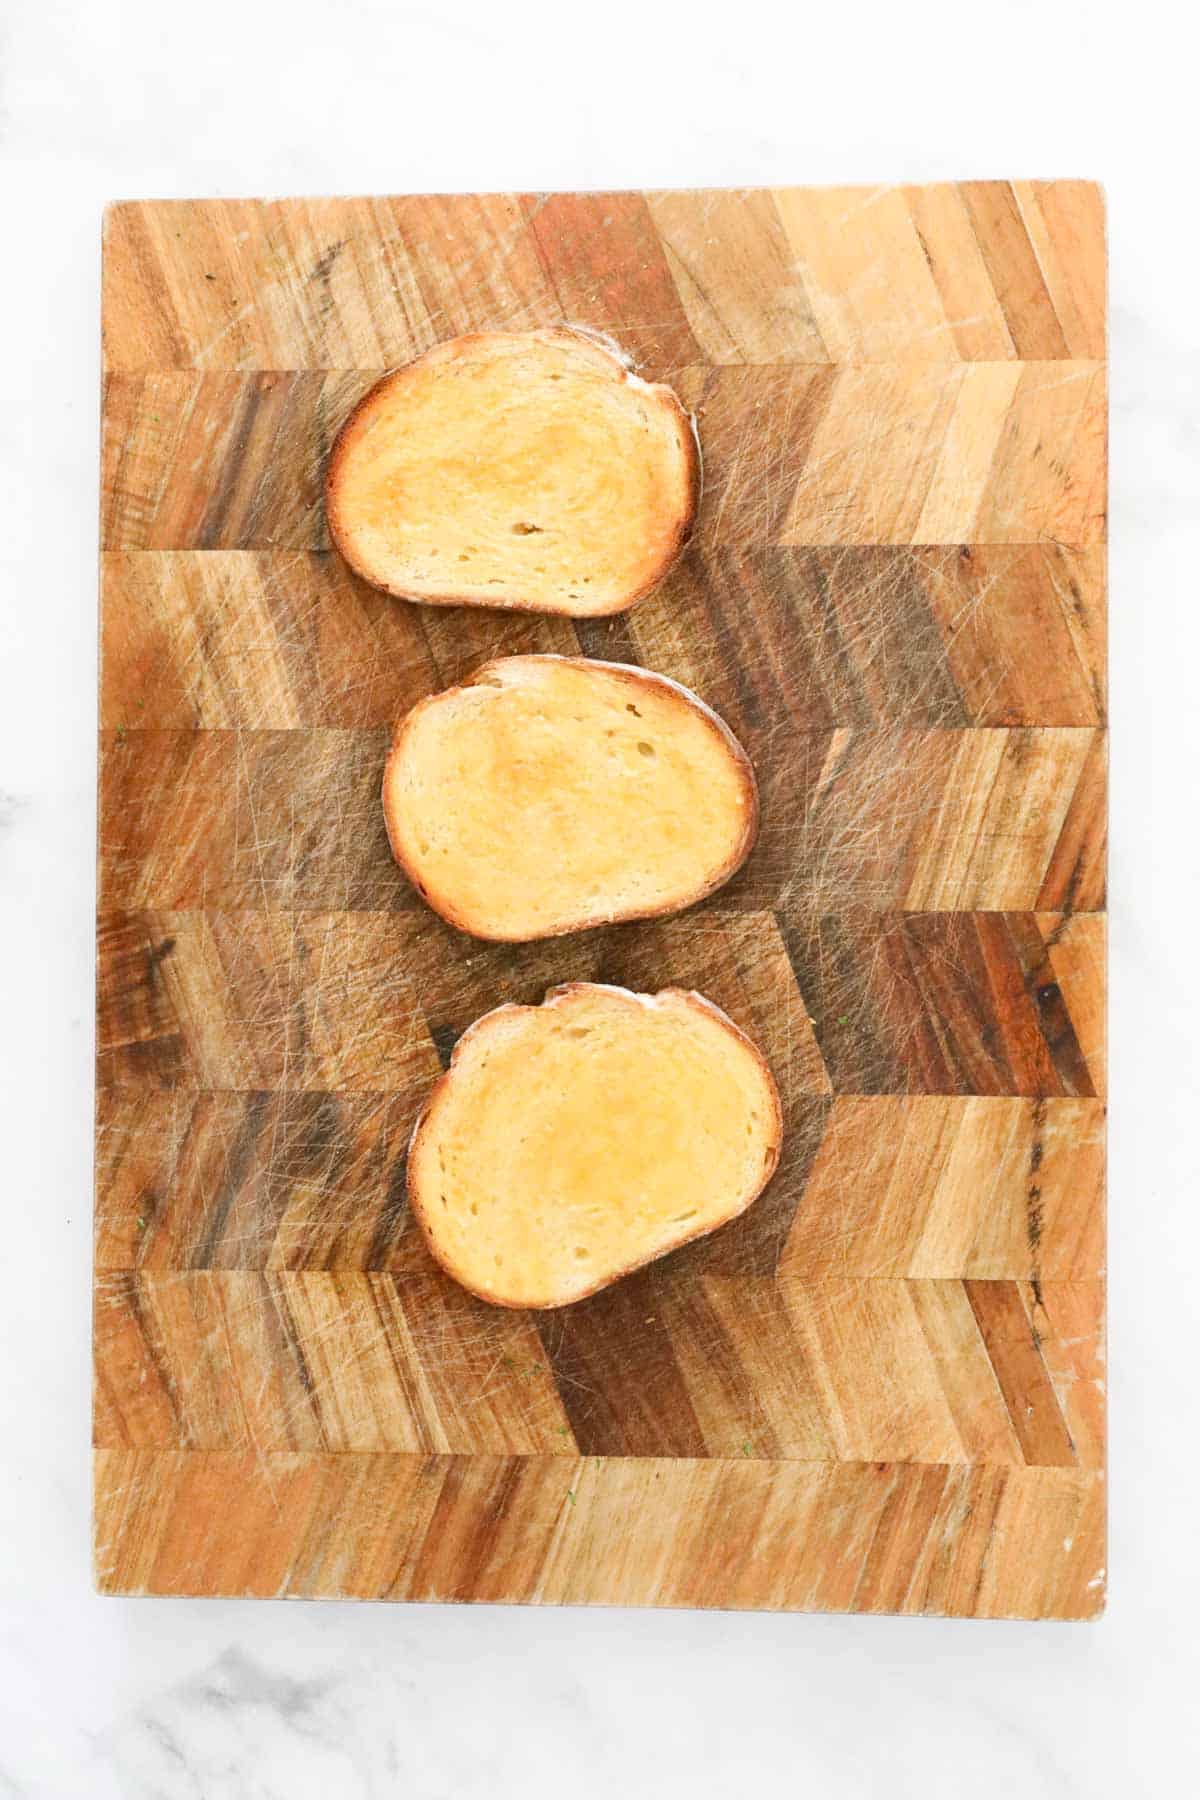 Three slices of toasted sourdough, buttered, on a wooden board.